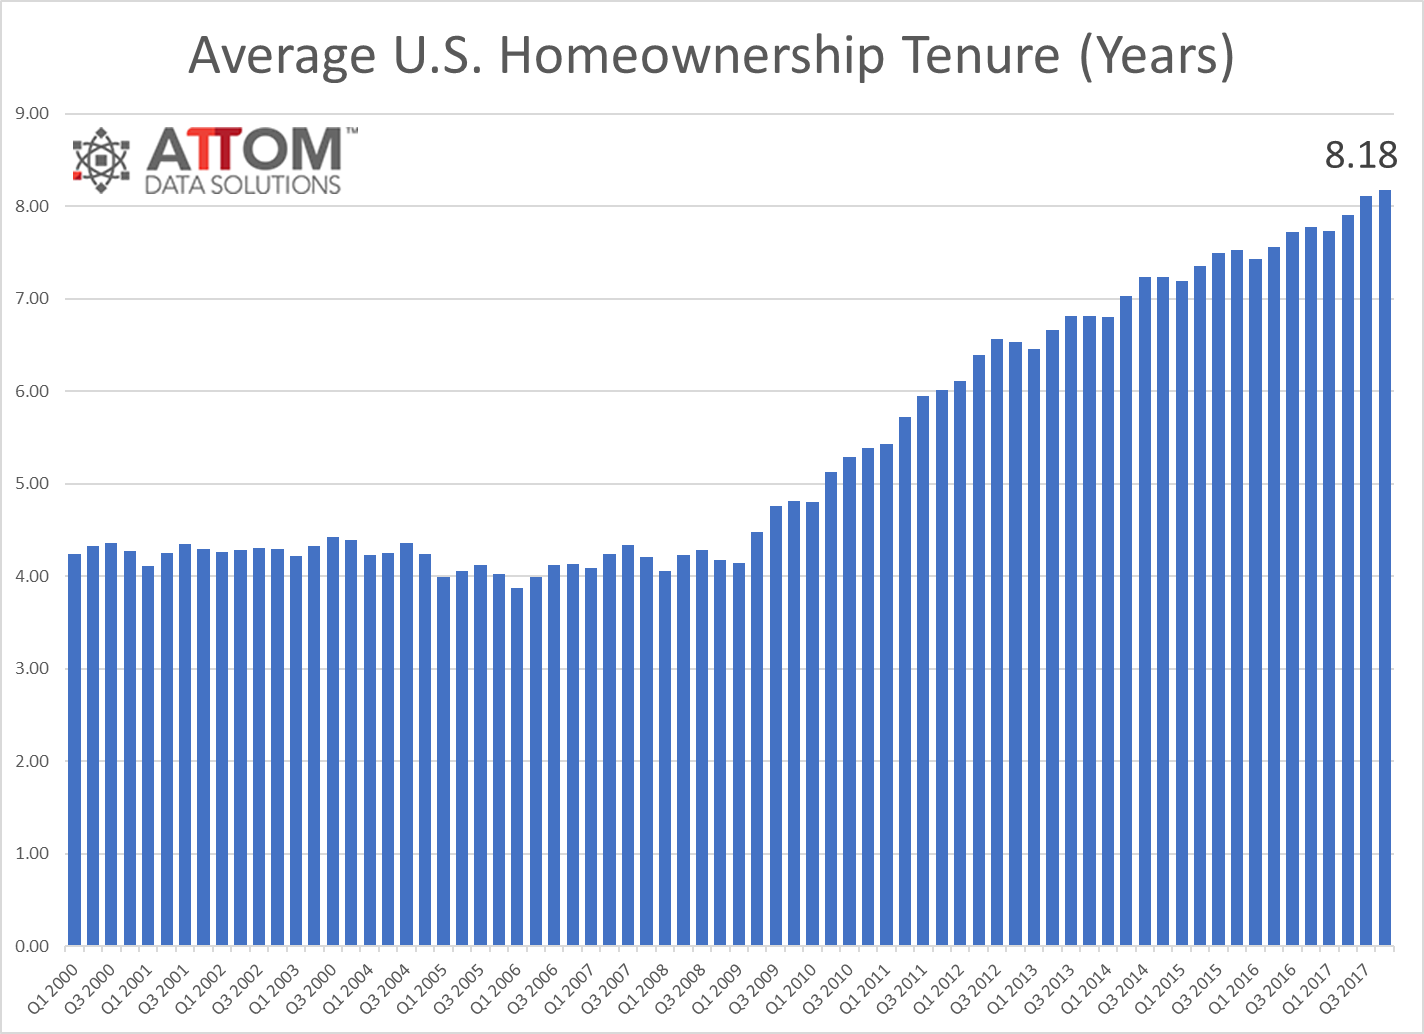 Home sellers enjoyed an average home price gain since purchase of $54,000 during the fourth quarter of 2017, up from $53,732 in the previous quarter and up from $47,133 one year earlier